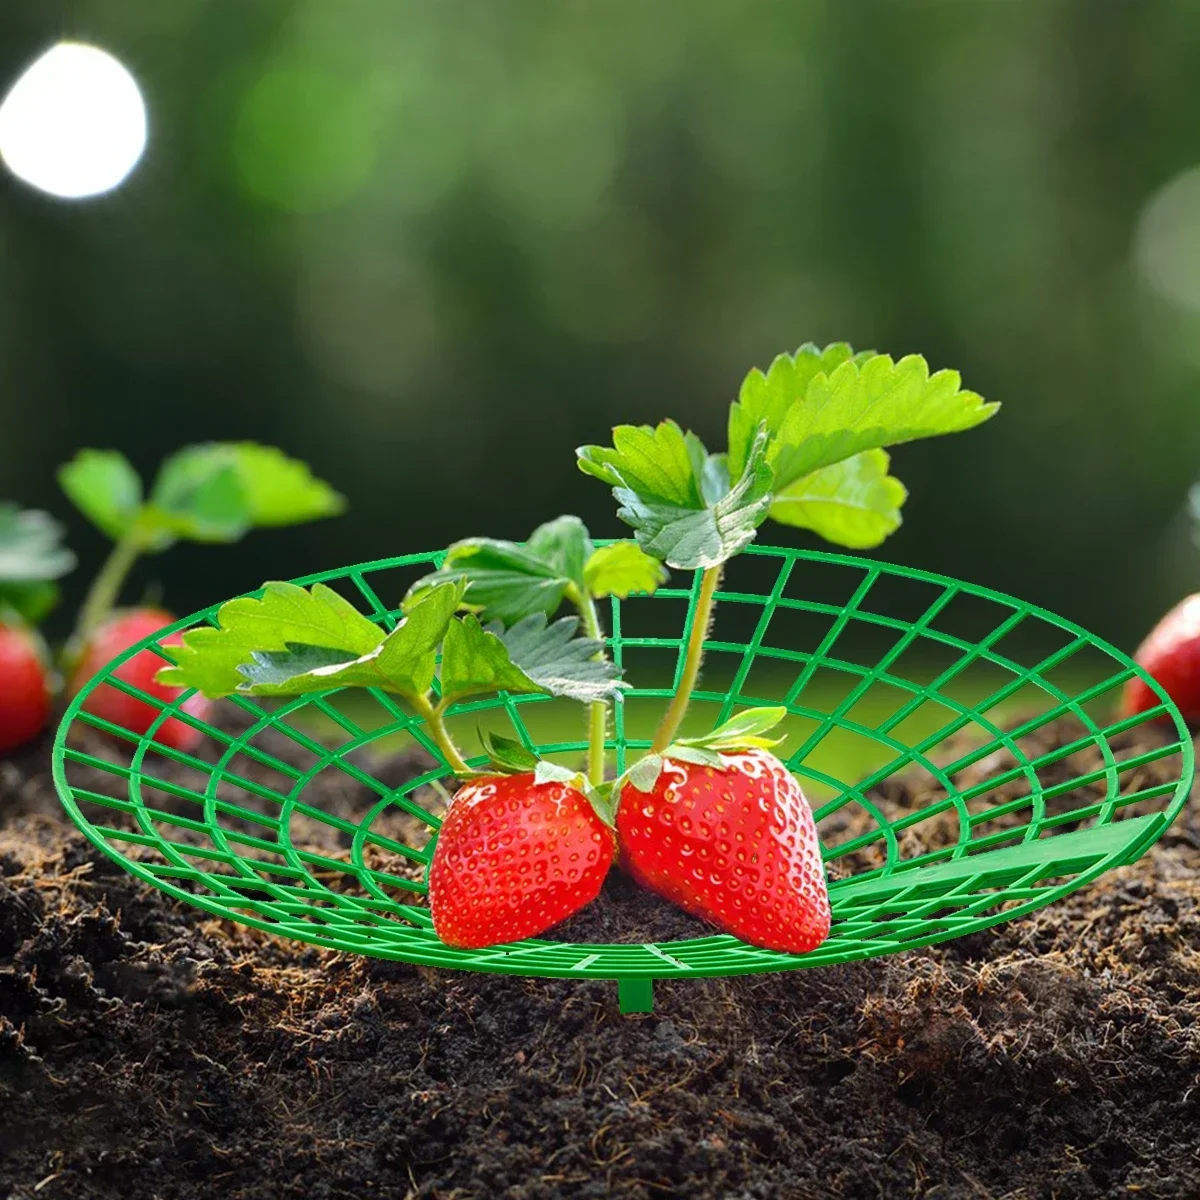 

Dirt Cage 3 Supports Holder Racks With Plant Growing Sturdy From Frame Mold Strawberry 5/10/20pcs Legs Protector Rot